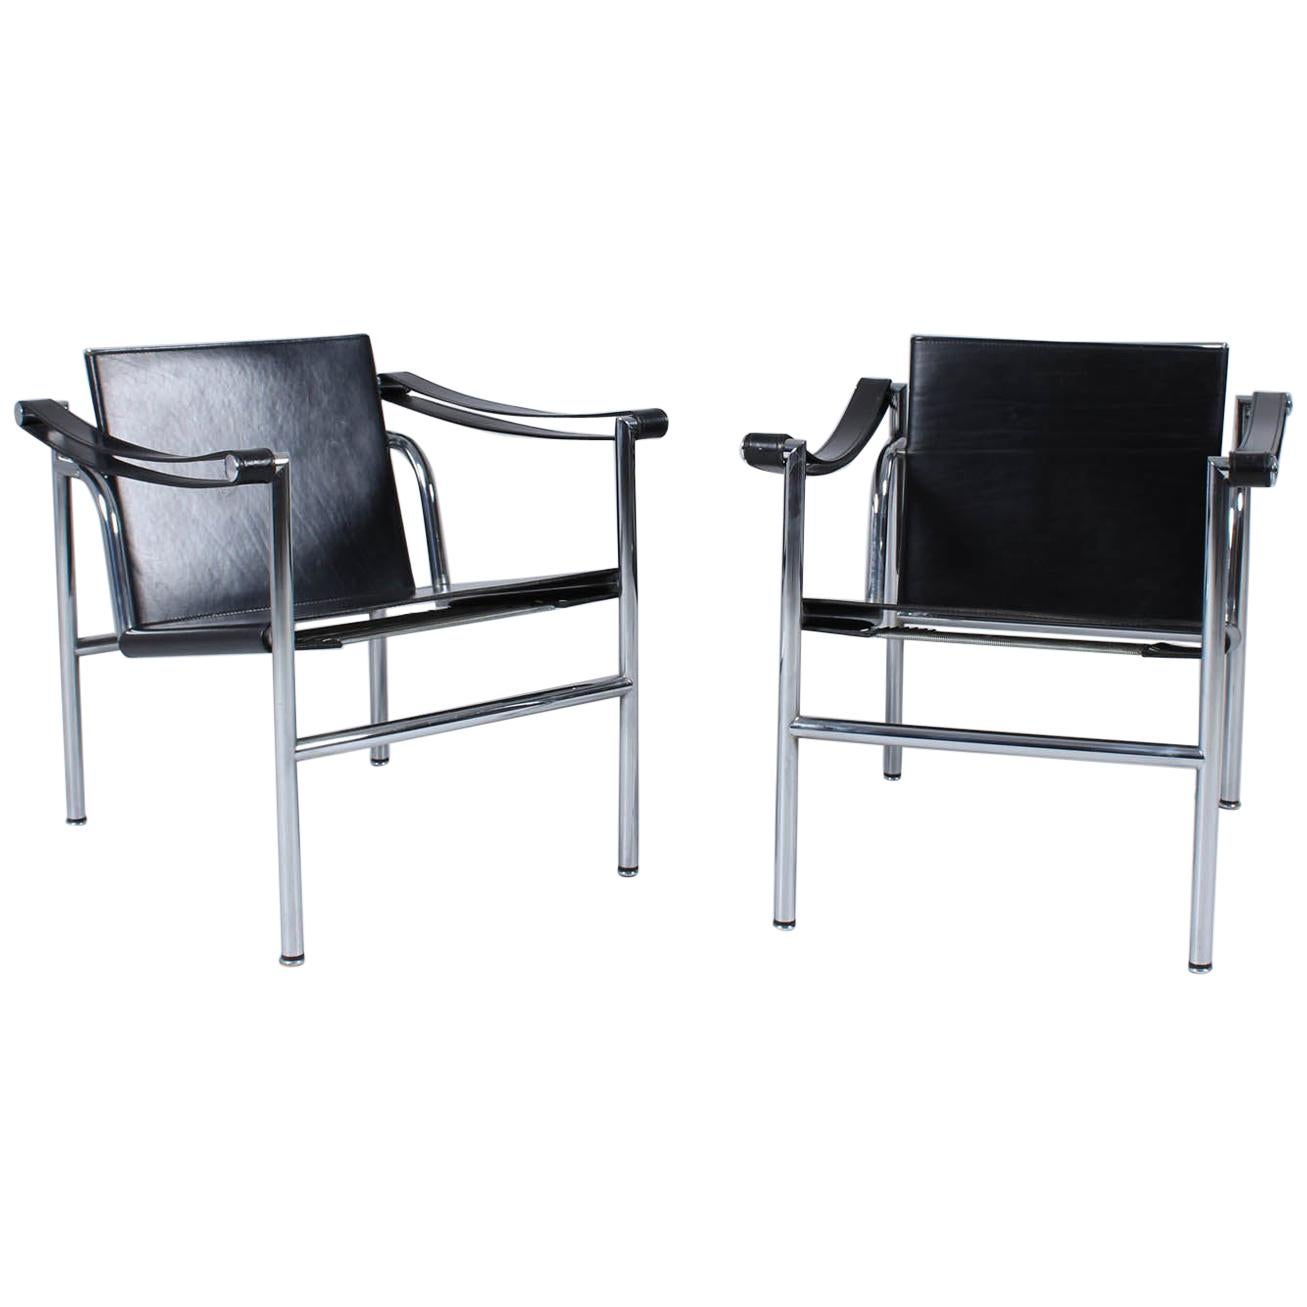 Pair of Le Corbusier LC1 Chairs, Cassina, Mailand 1982, with Original Papers